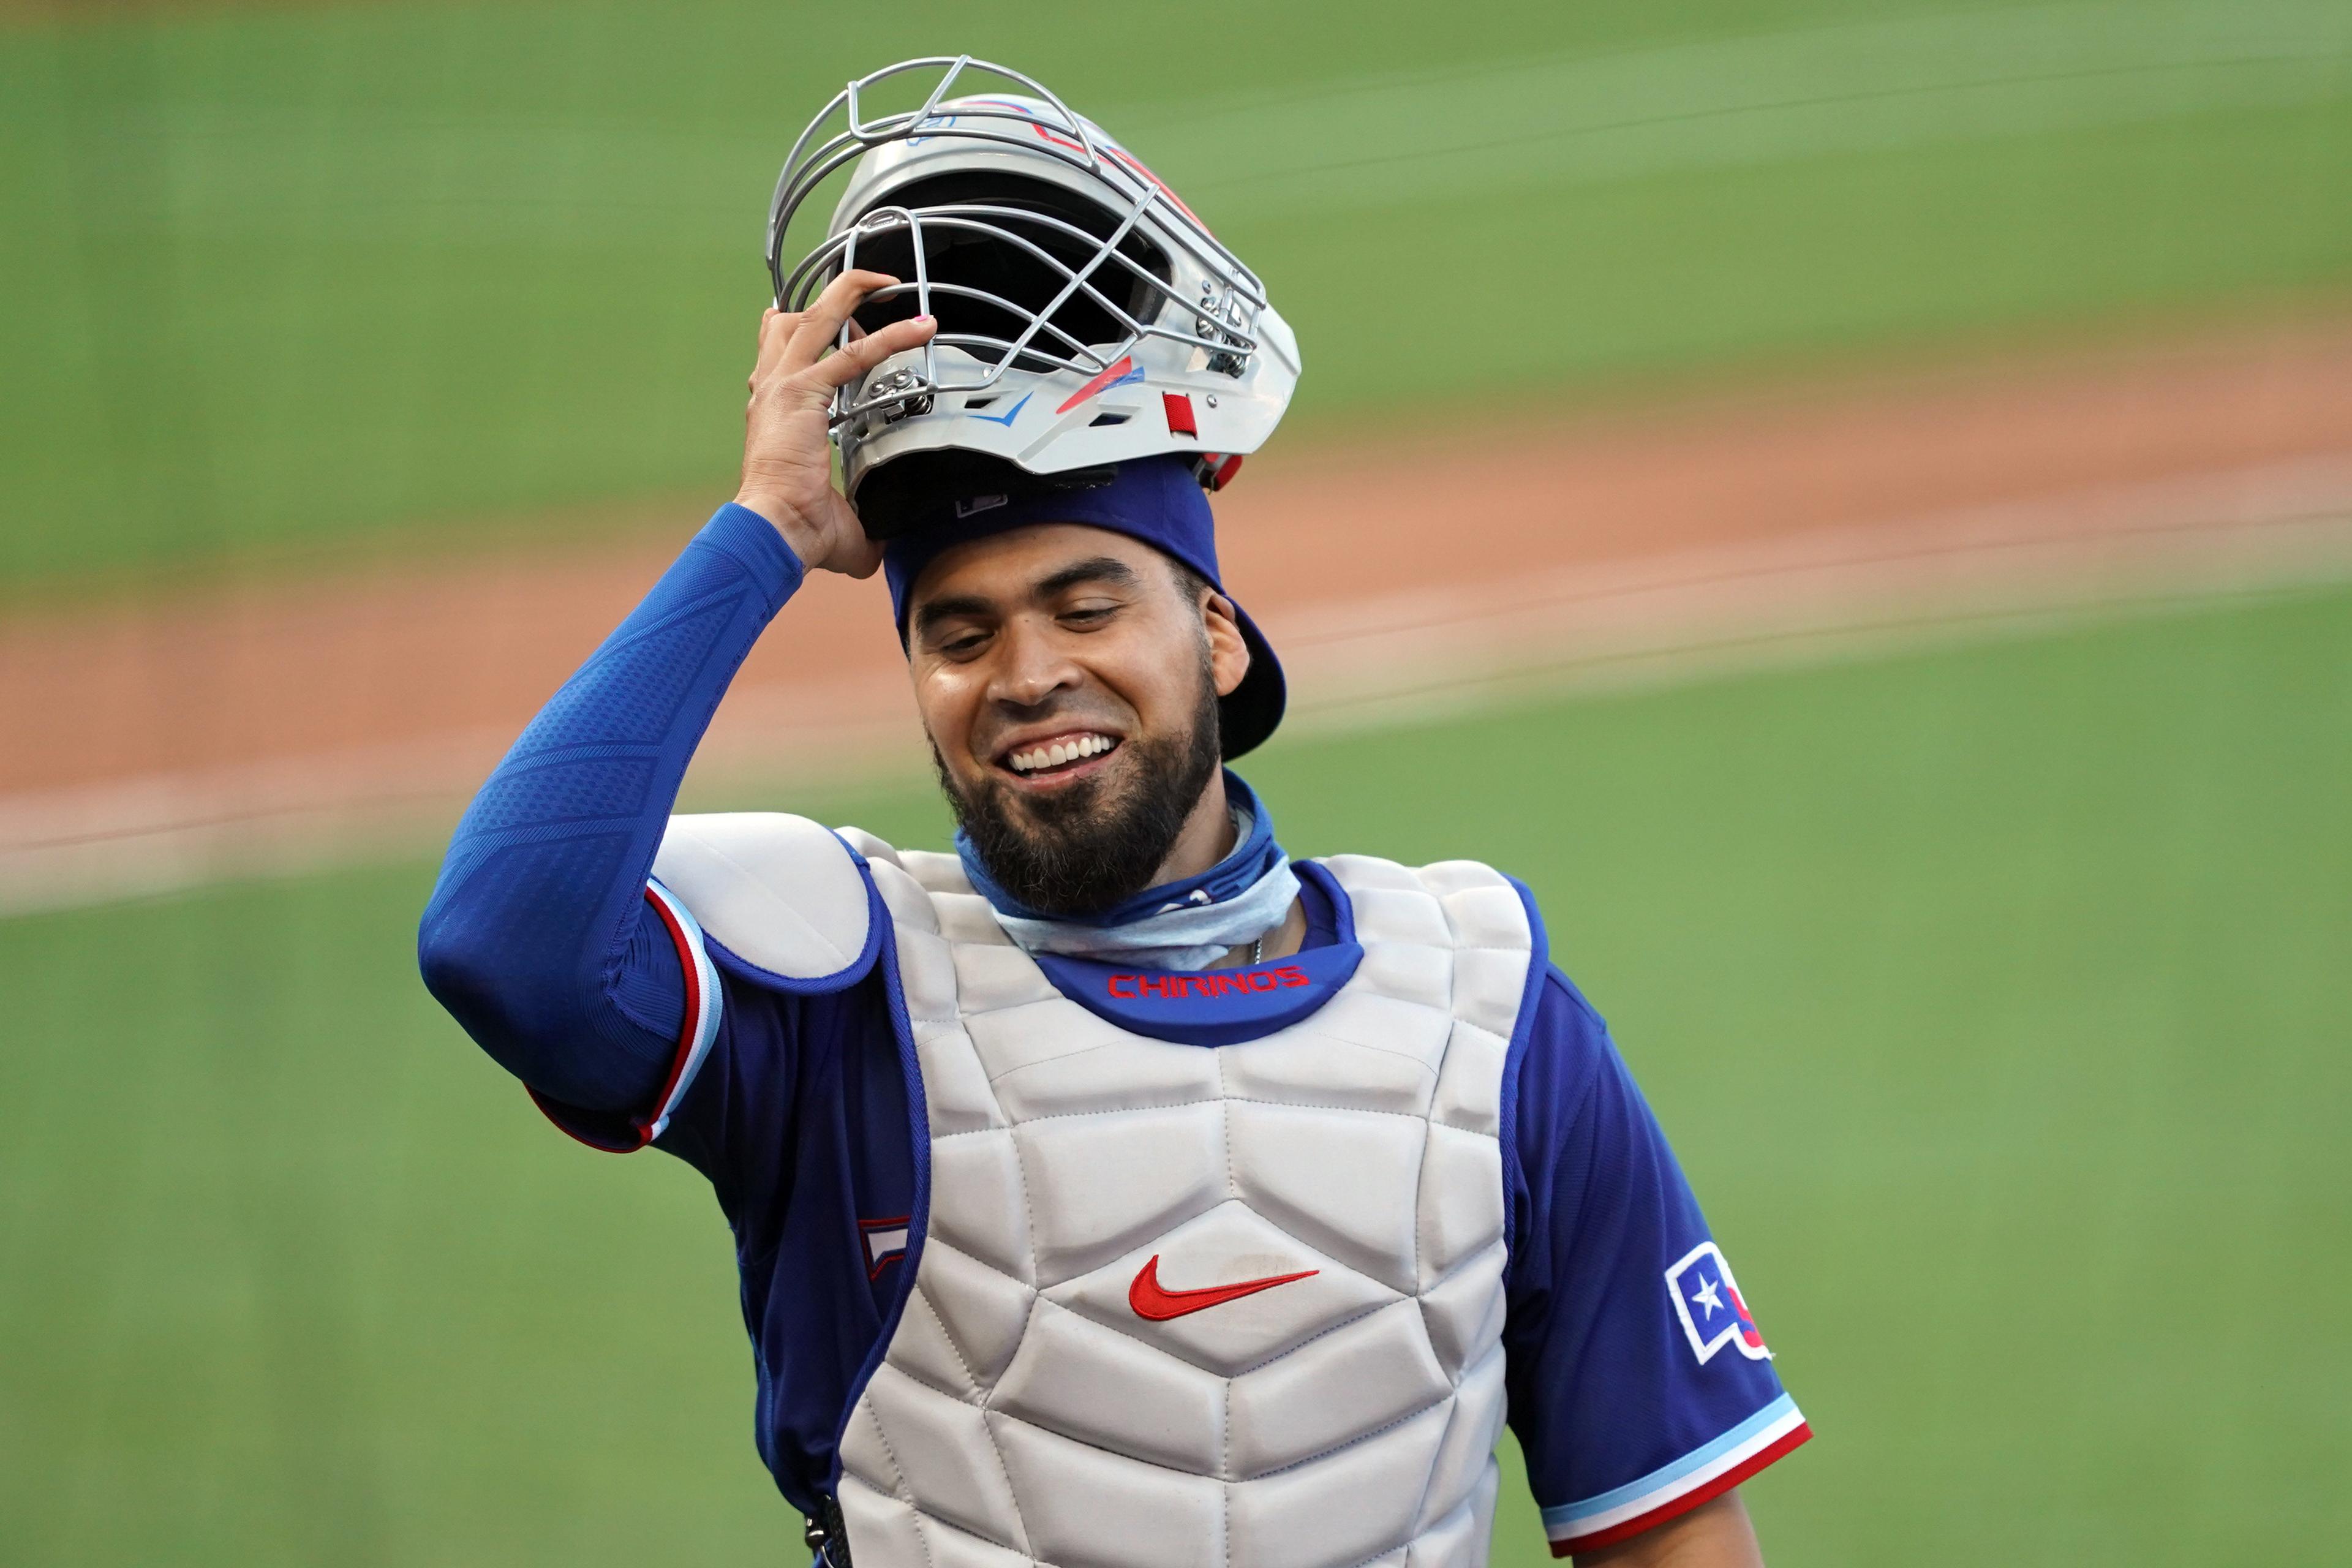 Aug 1, 2020; San Francisco, California, USA; Texas Rangers catcher Robinson Chirinos (61) smiles on the field at the end of the second inning against the San Francisco Giants at Oracle Park. Mandatory Credit: Darren Yamashita-USA TODAY Sports / © Darren Yamashita-USA TODAY Sports